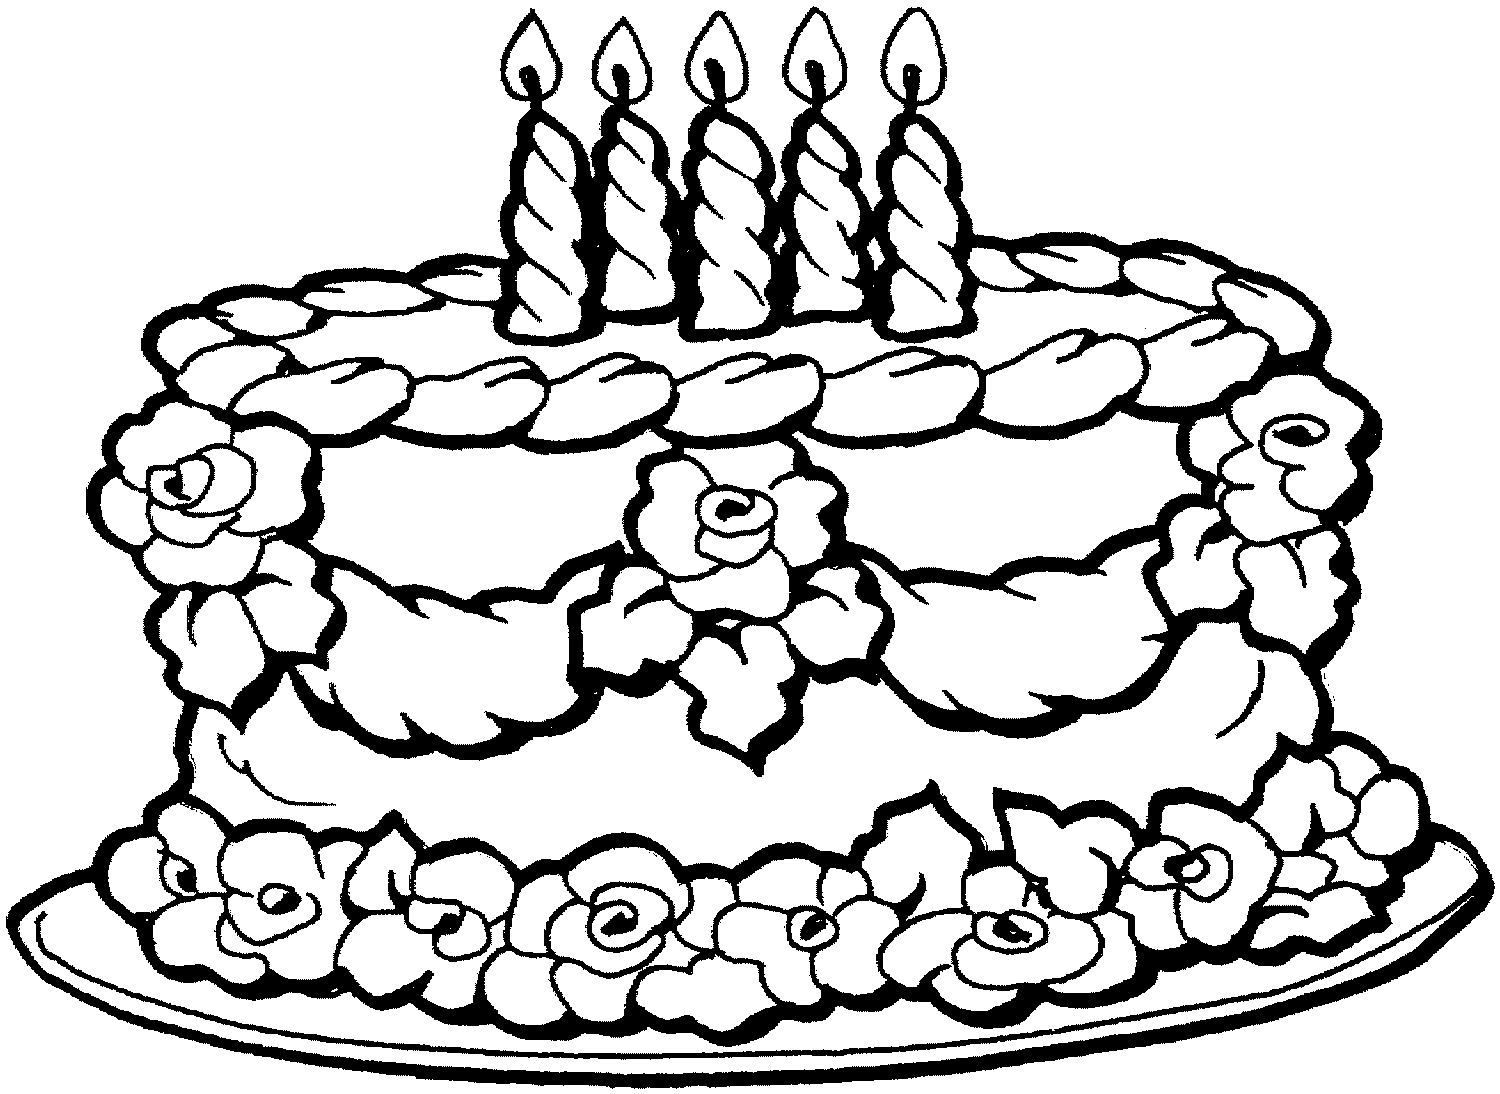 Free Printable Happy Birthday Coloring Pages: 24 Image - Gianfreda.net